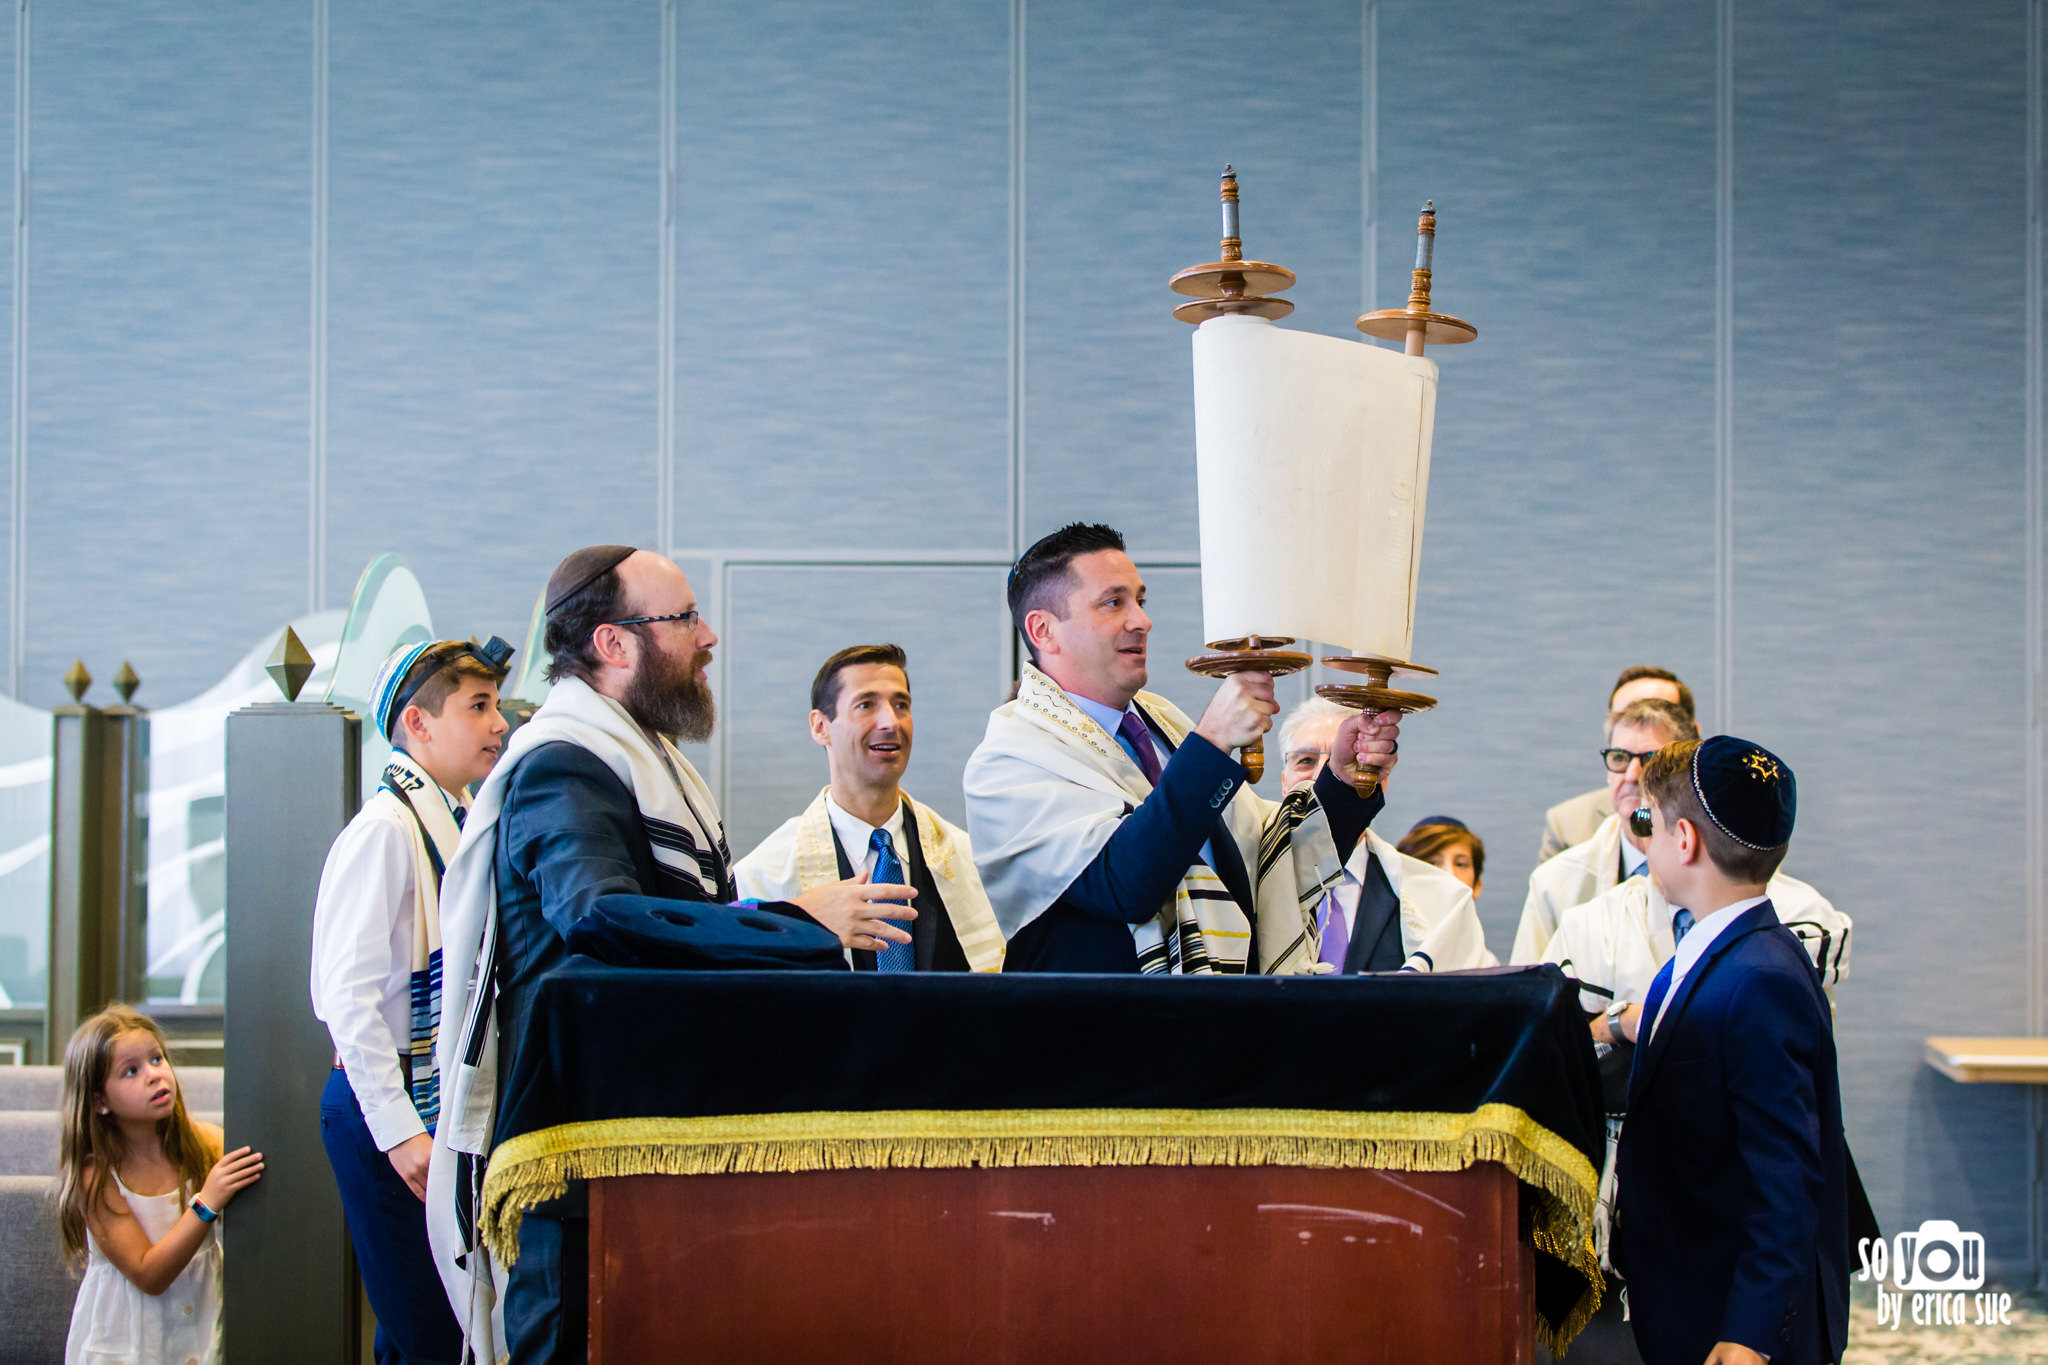 15-so-you-by-erica-sue-chabad-parkland-bar-mitzvah-photographer-9463.JPG